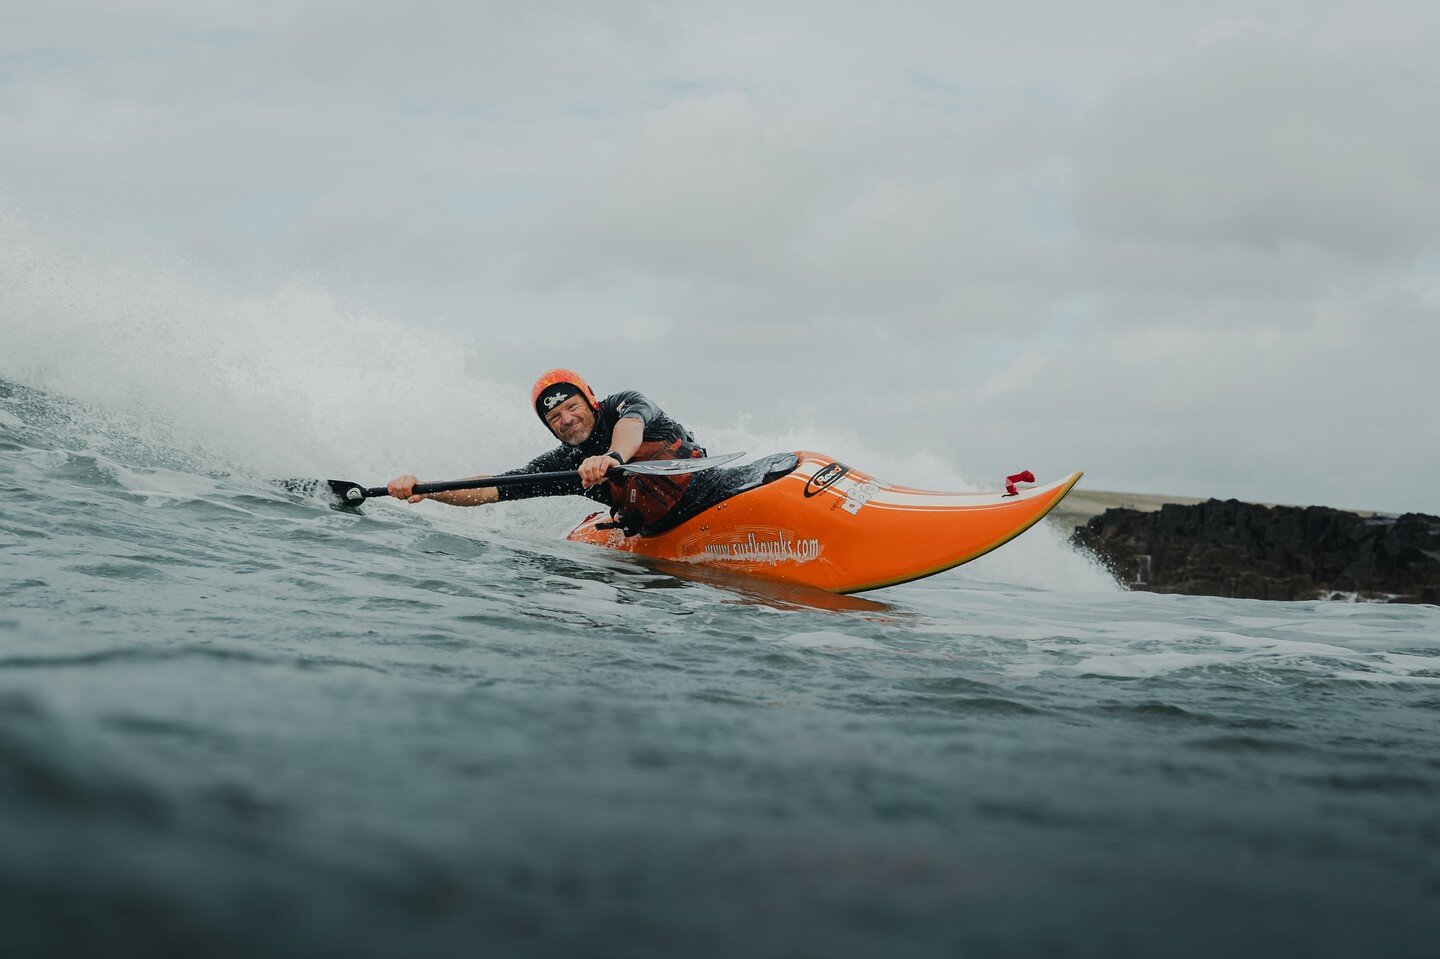 Simon Hammond in our orange and yellow surf lid! Simon is hosting a Bude Surf Kayaking Bonanza!

1st and 2nd July - Surf Kayaking Skills weekend
3rd and 4th July - How to Lead others in the Surf
Come to Bude, the home of Surf Kayaking in the UK, to l